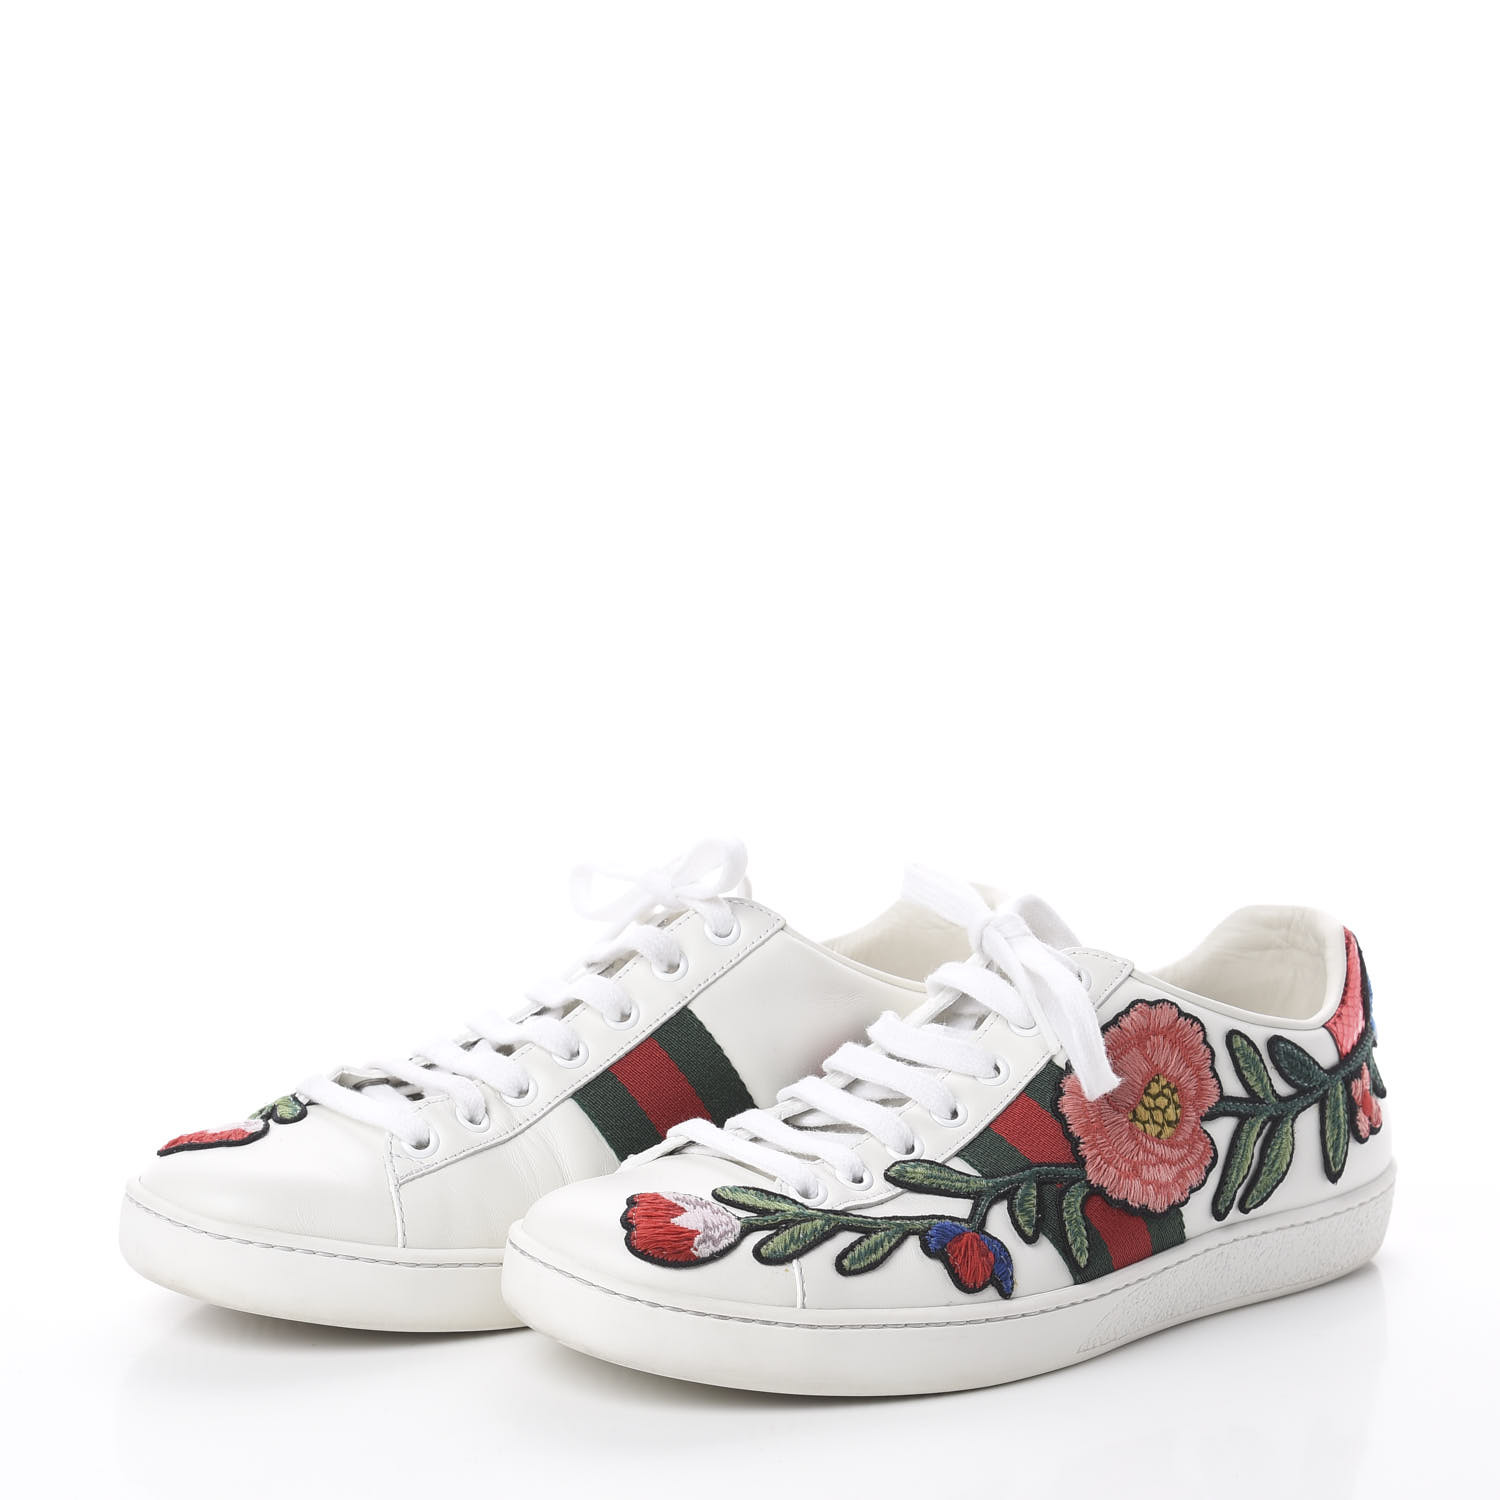 GUCCI Calfskin Web Floral Embroidered Womens Ace Sneakers 38.5 White ...